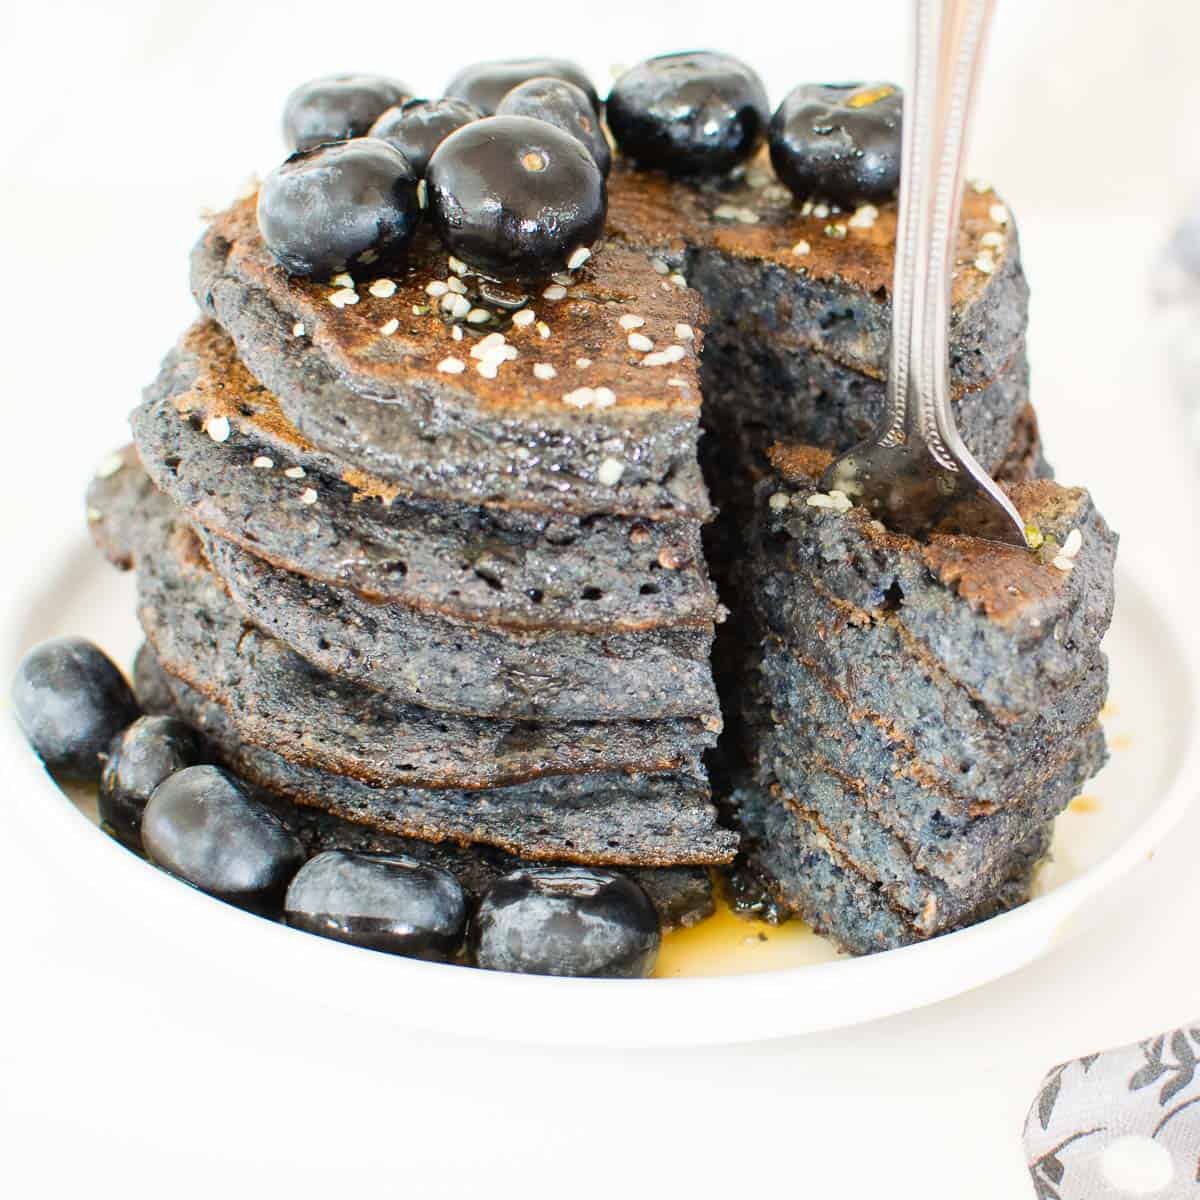 a fork digged into the slices of vegan blueberry spelt flour pancakes showing its inside. 